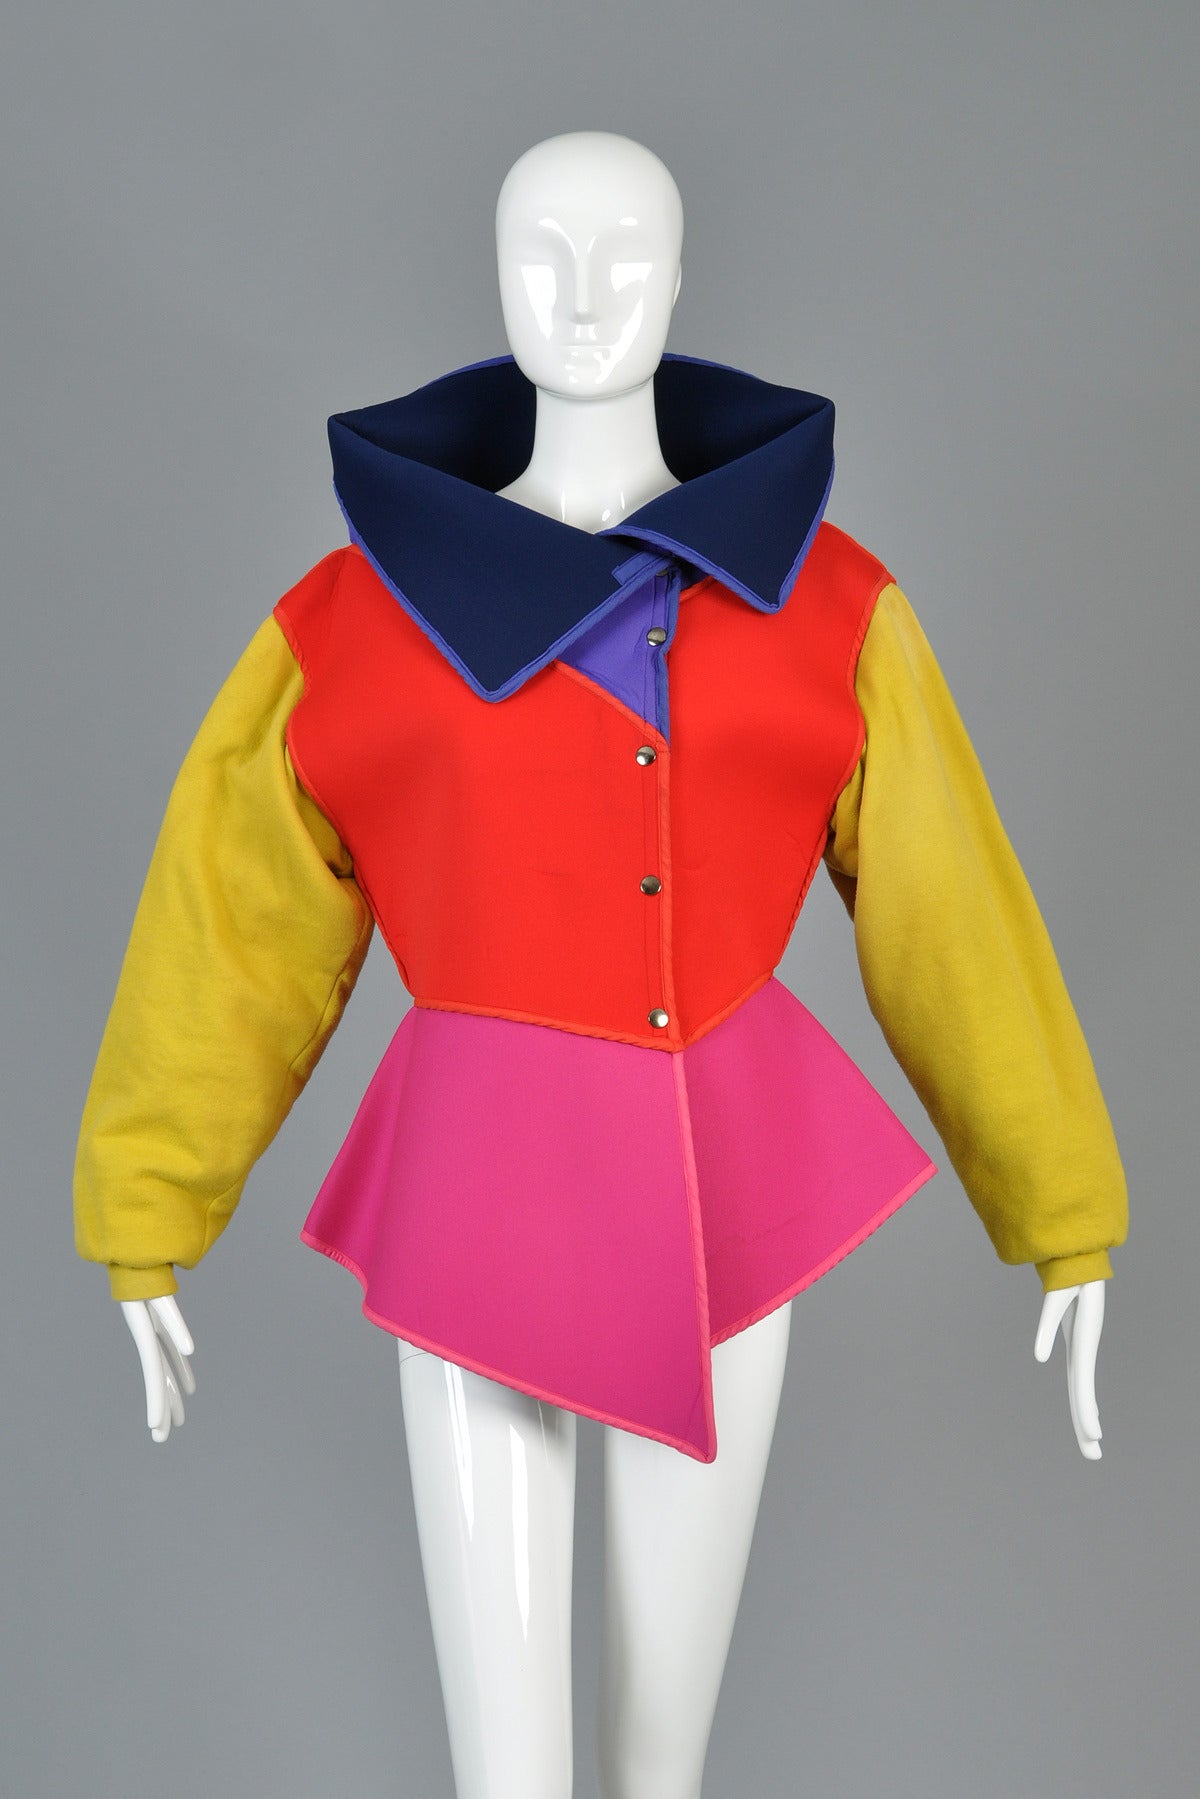 Circa 1983/84 Kansai Yamamoto Colorblocked Neoprene Jacket In Excellent Condition In Yucca Valley, CA